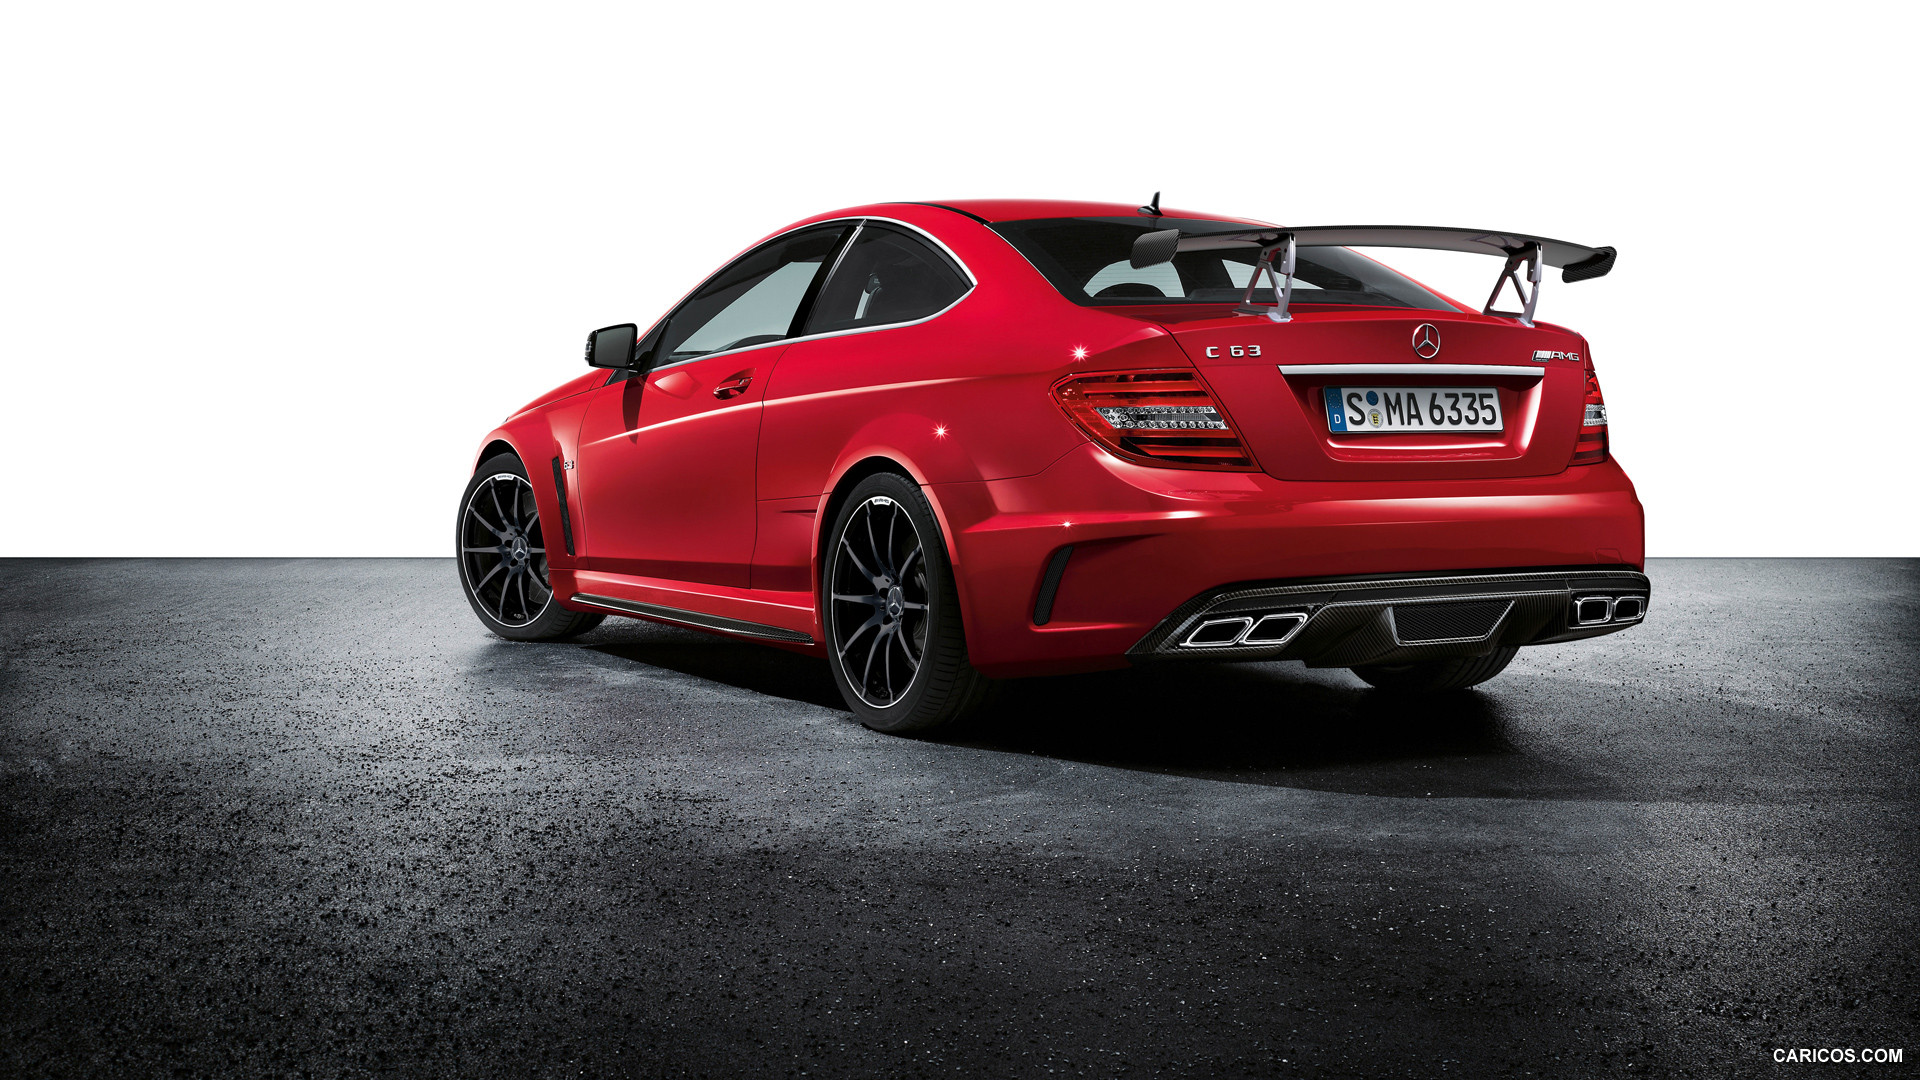 2012 Mercedes-Benz C63 AMG Coupe Black Series Aerodynamics Package - Rear, #133 of 136